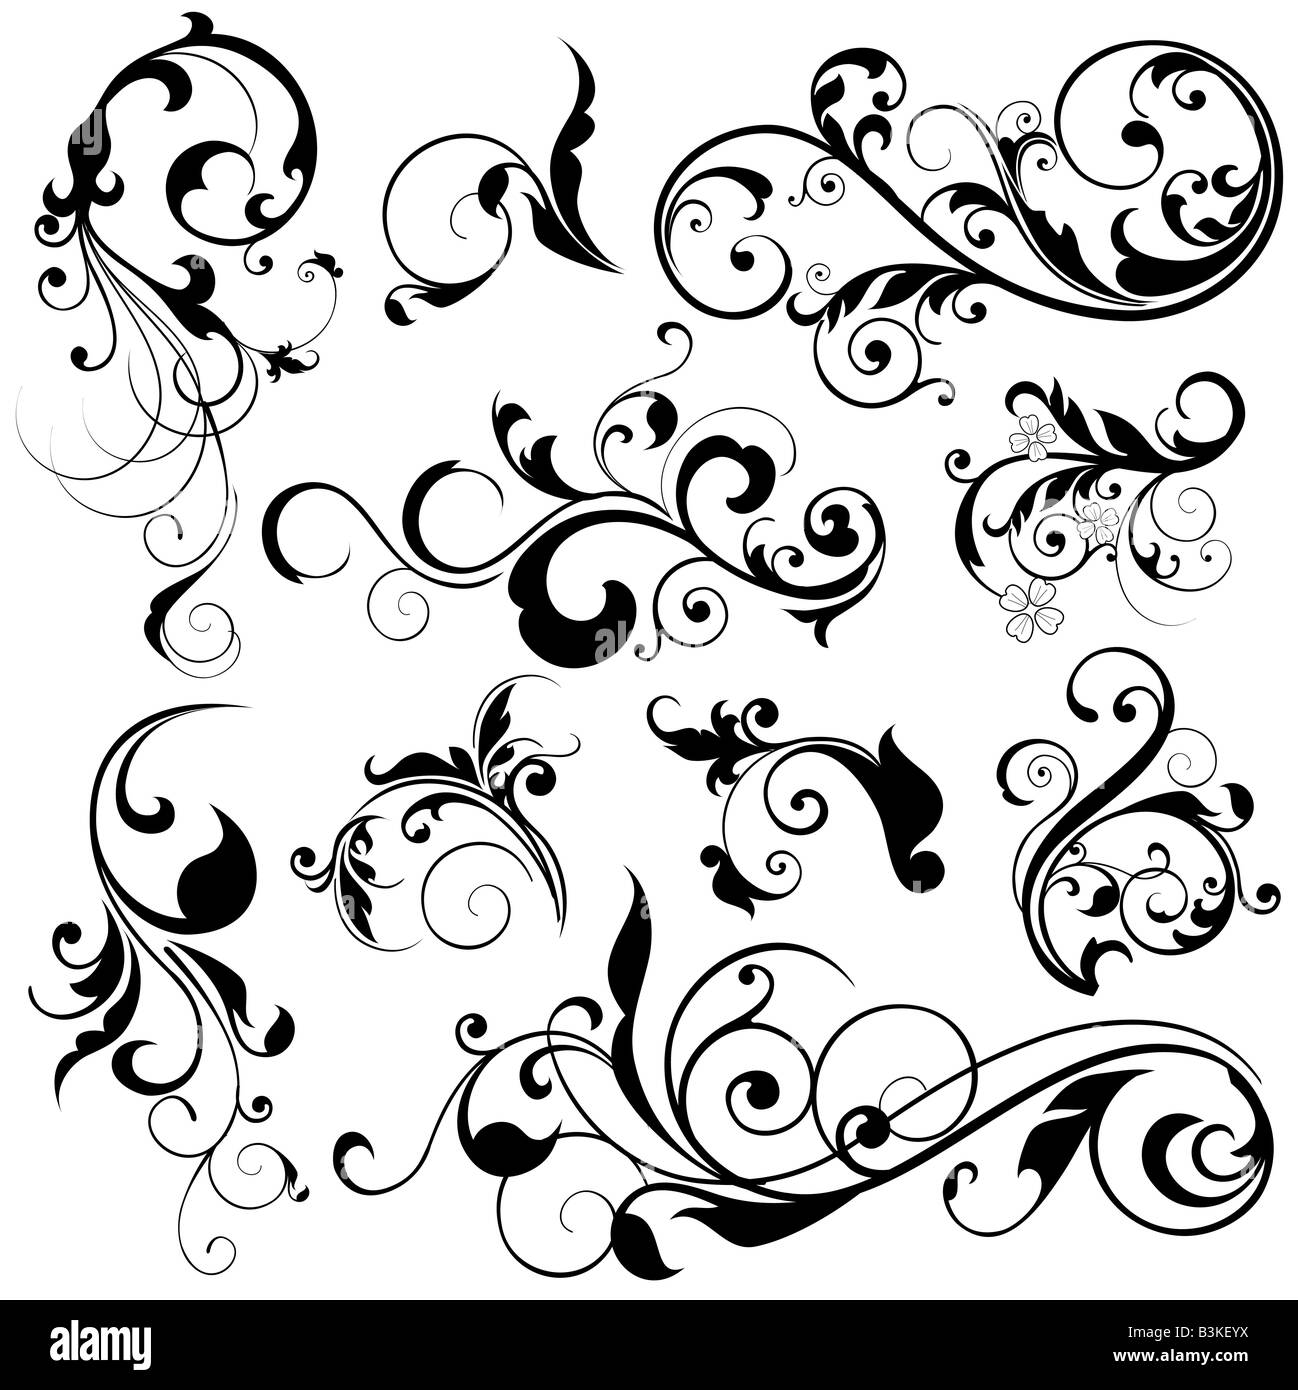 illustration drawing of floral design elements Stock Photo